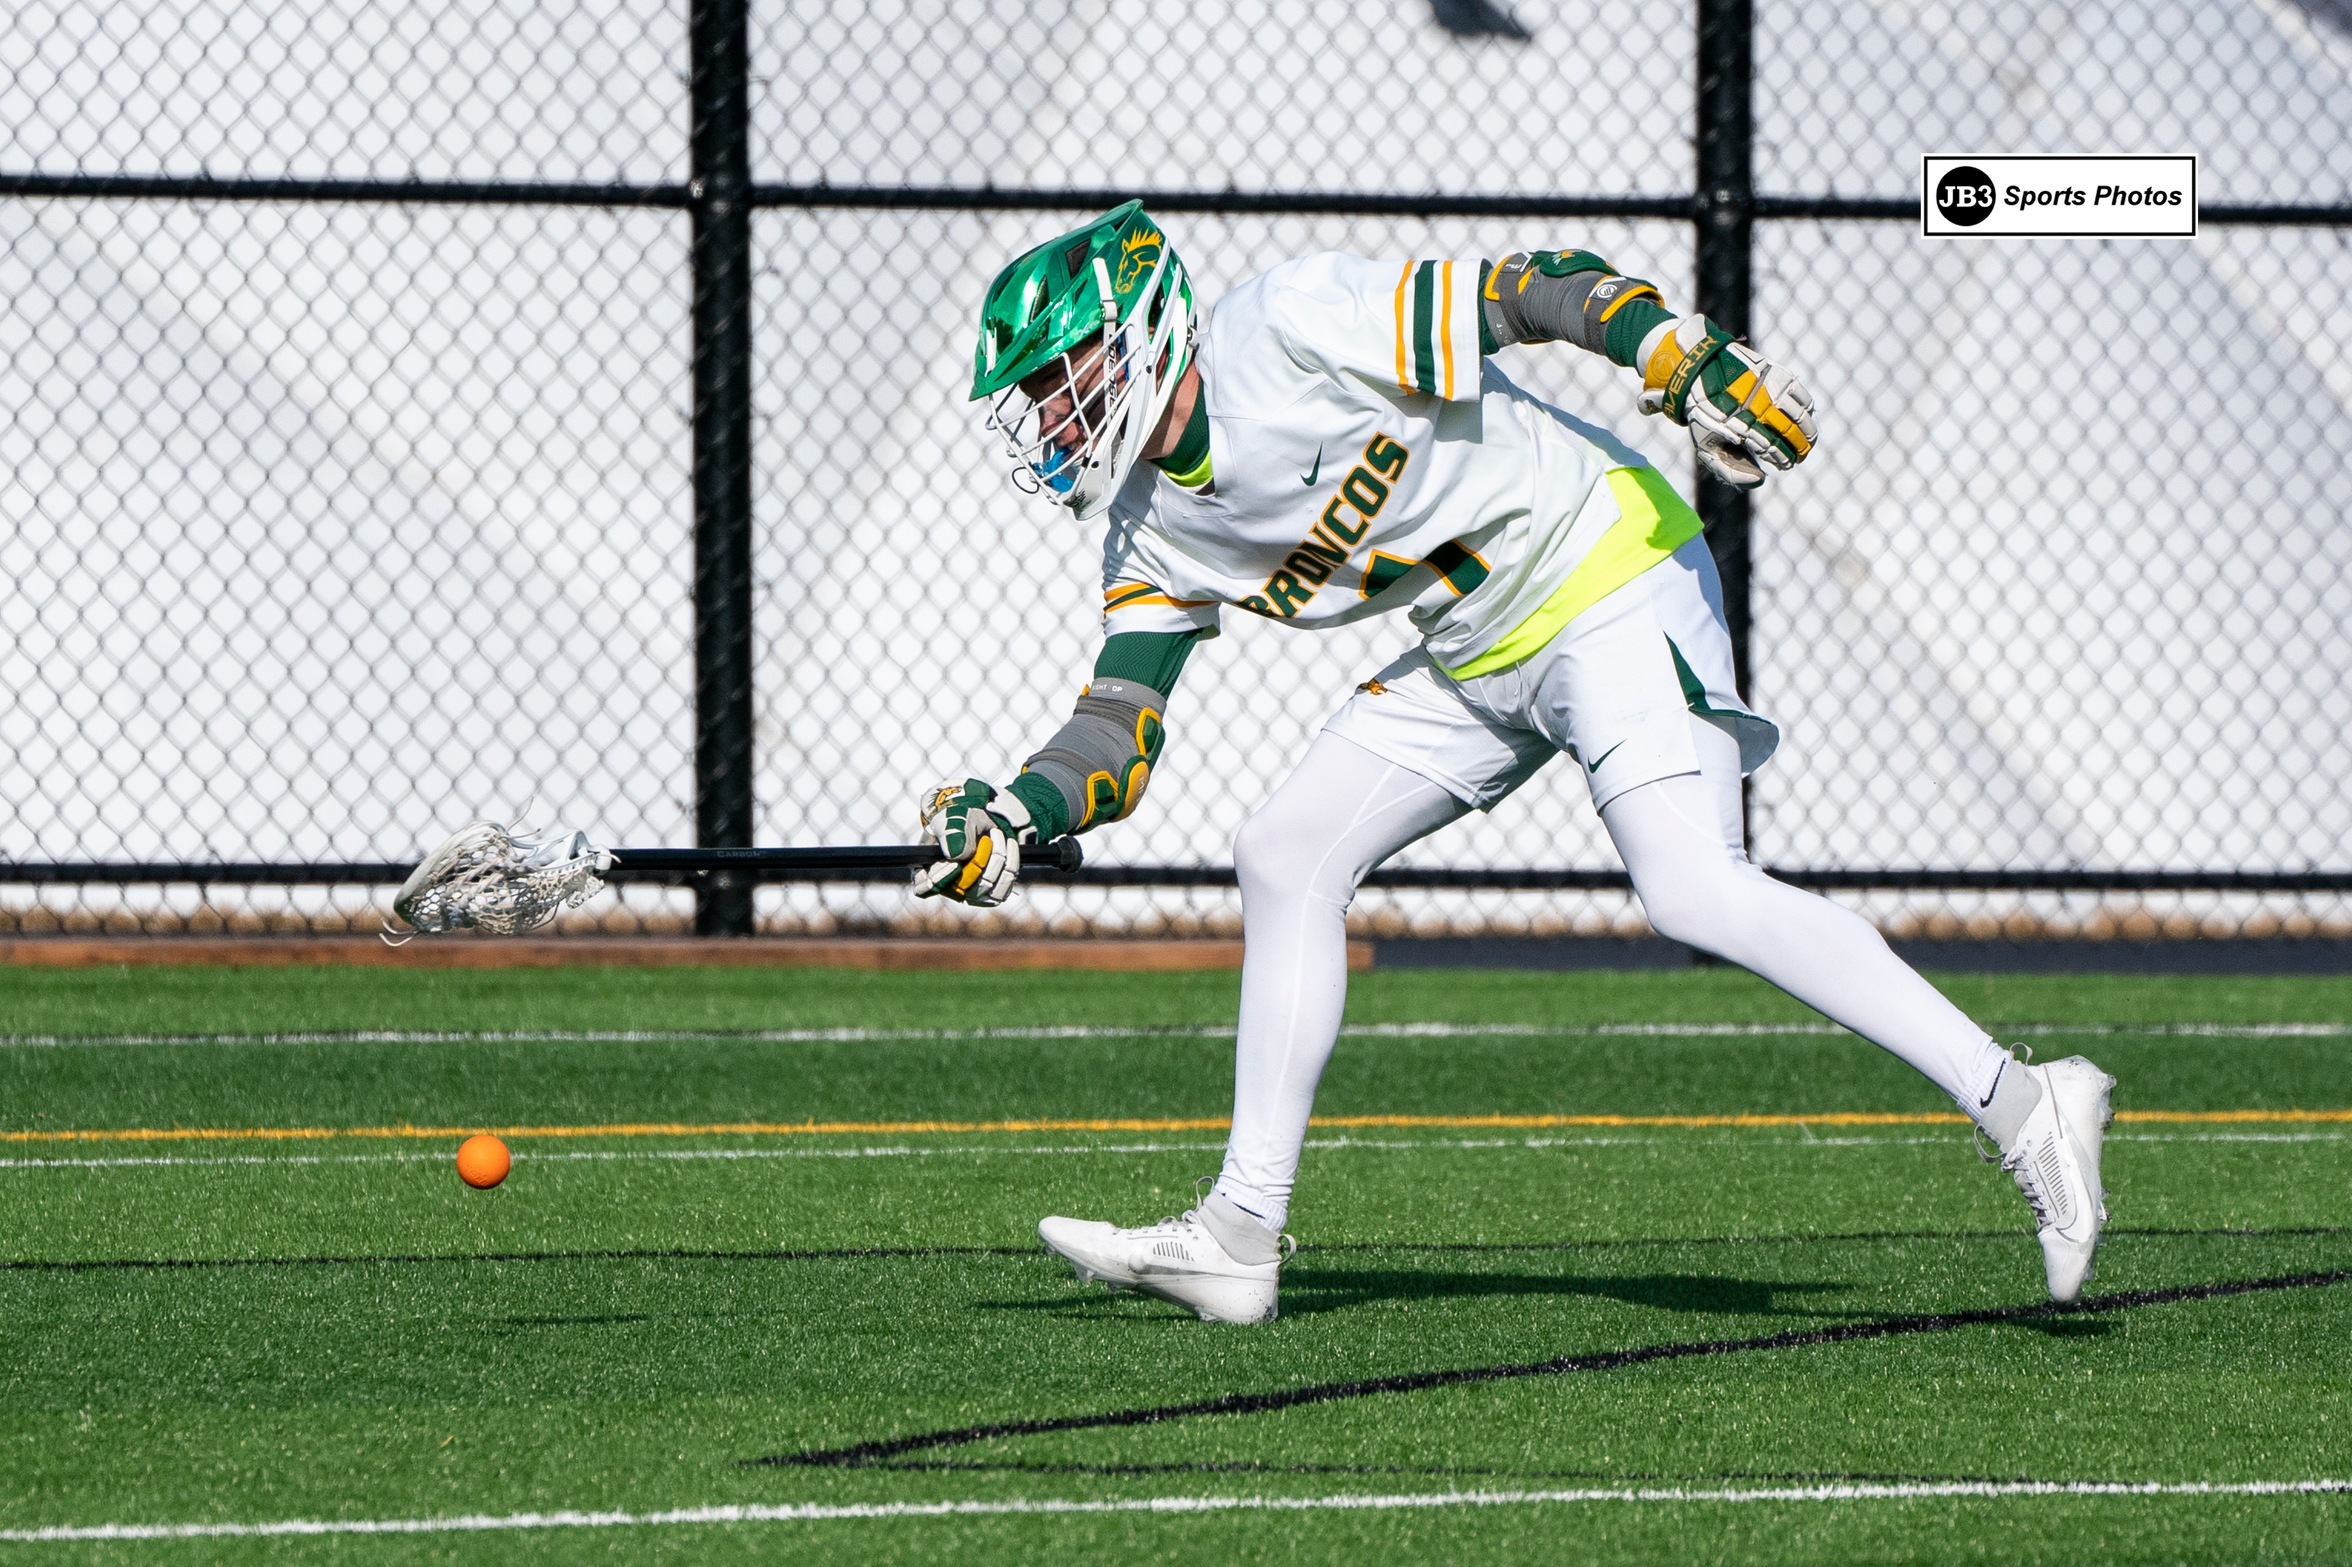 Men's Lacrosse takes down SUNY Canton 17-10 in first NAC game of the season